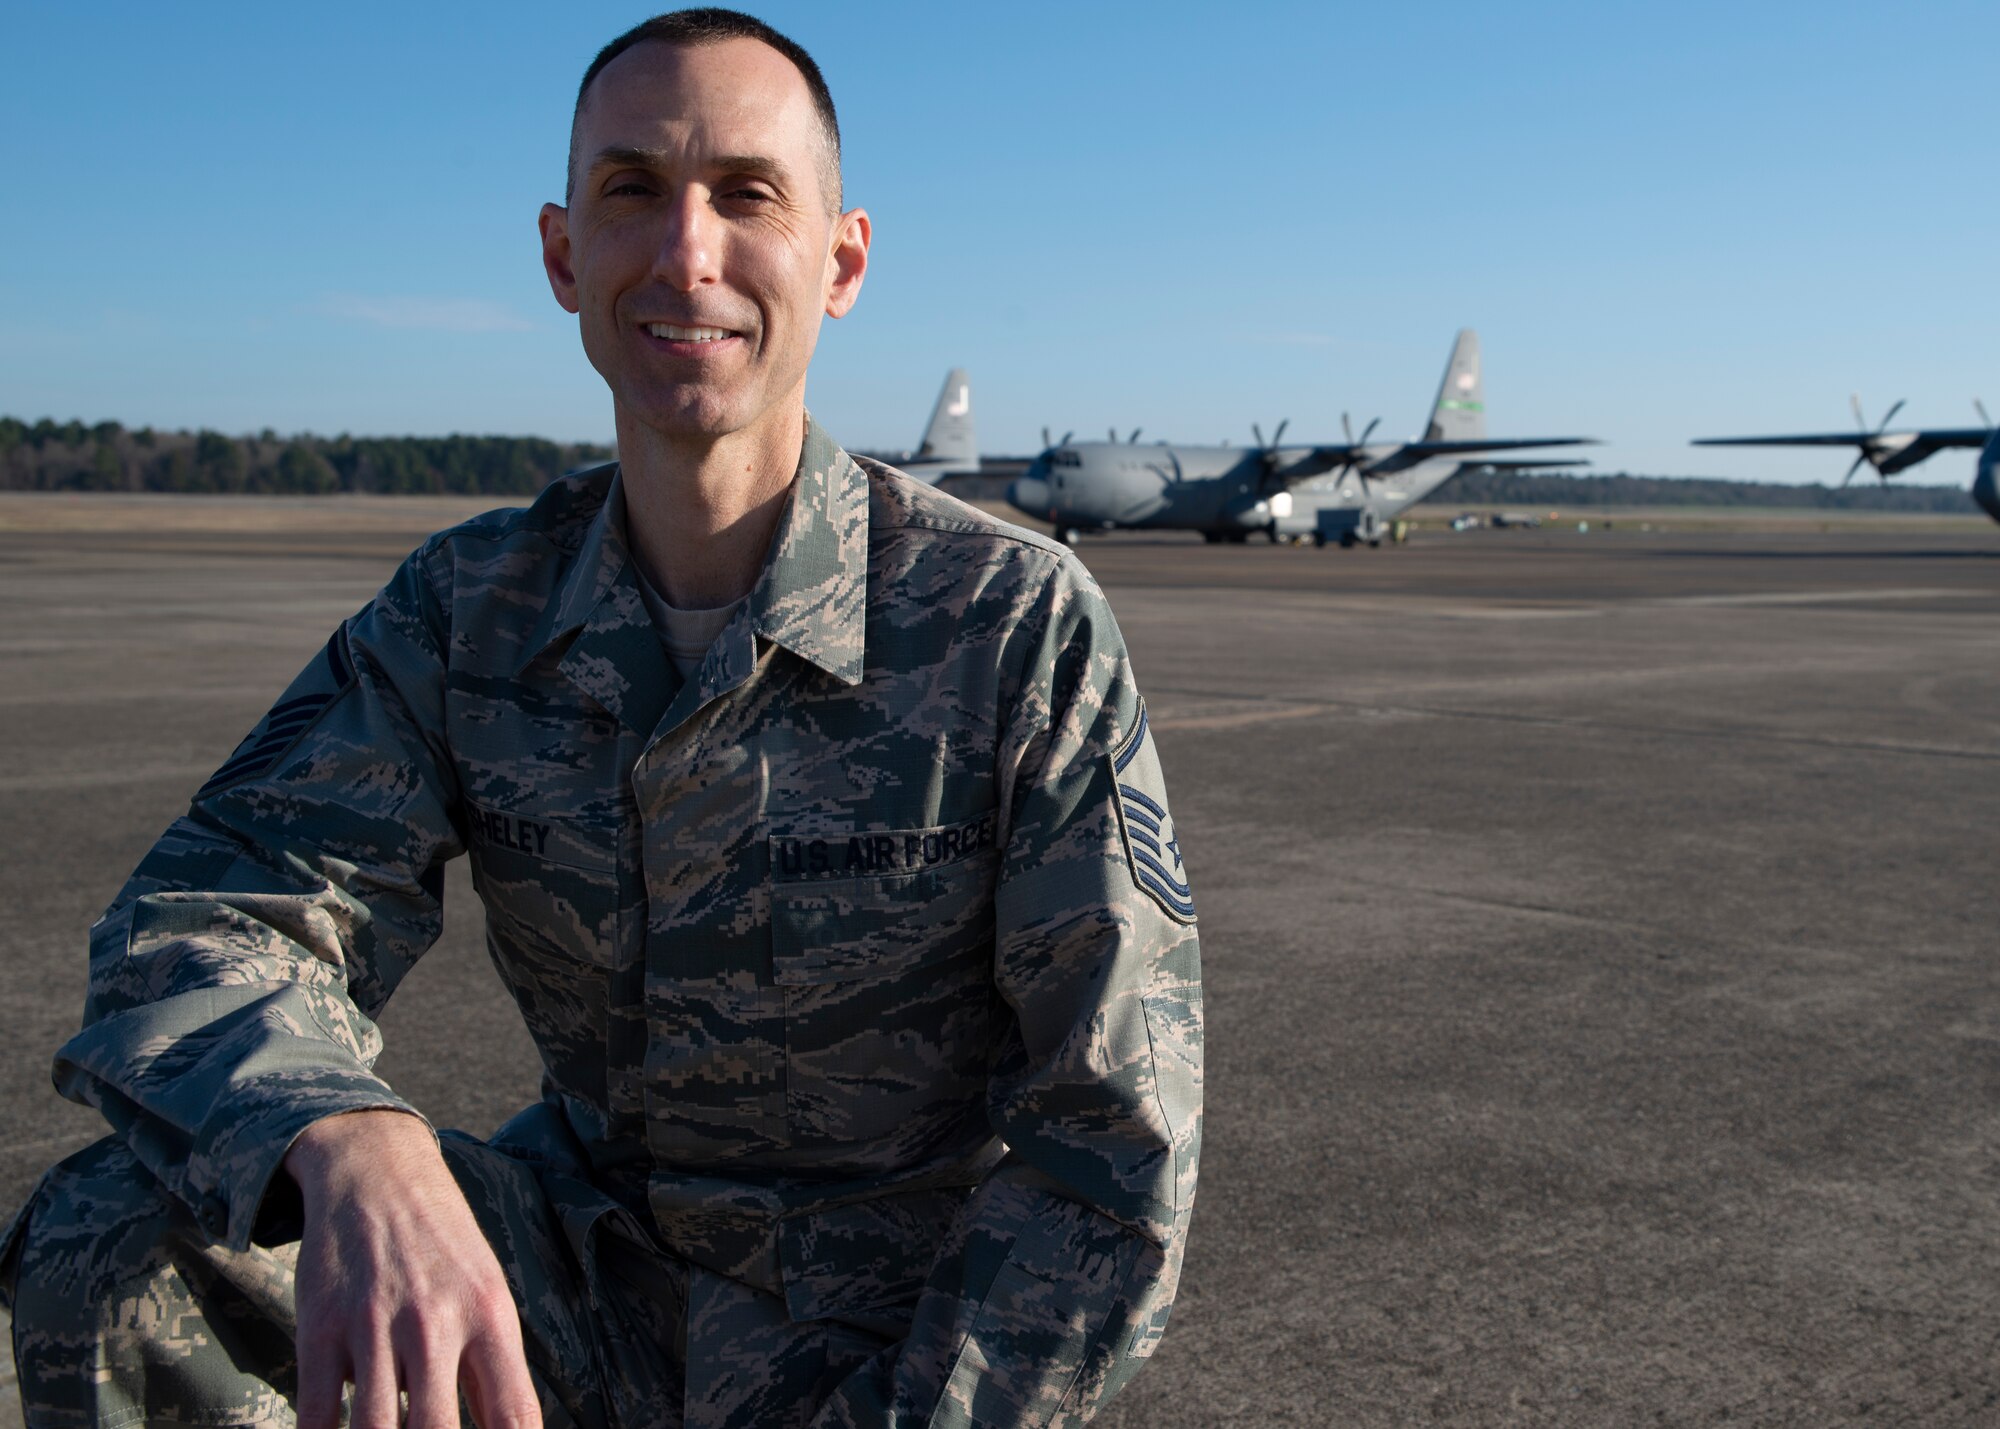 Master Sgt. Matthew Sheley poses on the flight line with C-130J aircraft in the background.